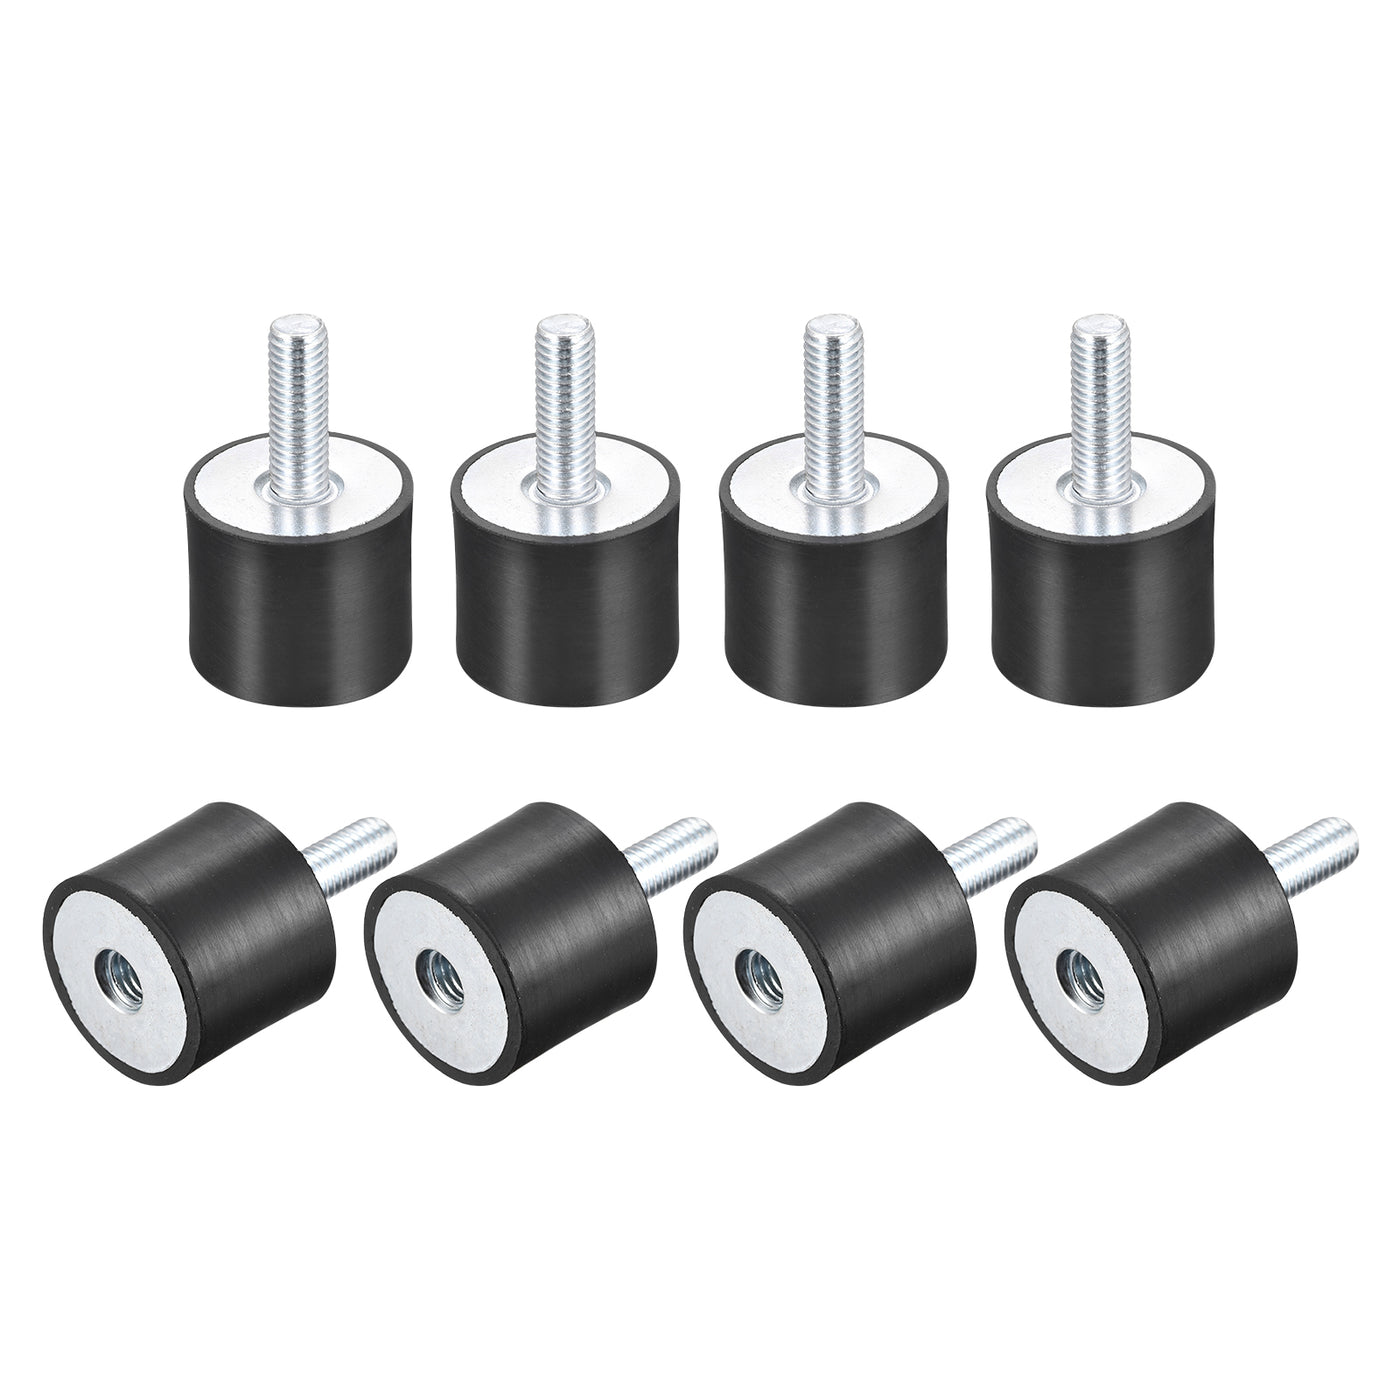 uxcell Uxcell Rubber Mounts 8pcs M8 Male/Female Vibration Isolator Shock Absorber D30mmxH25mm